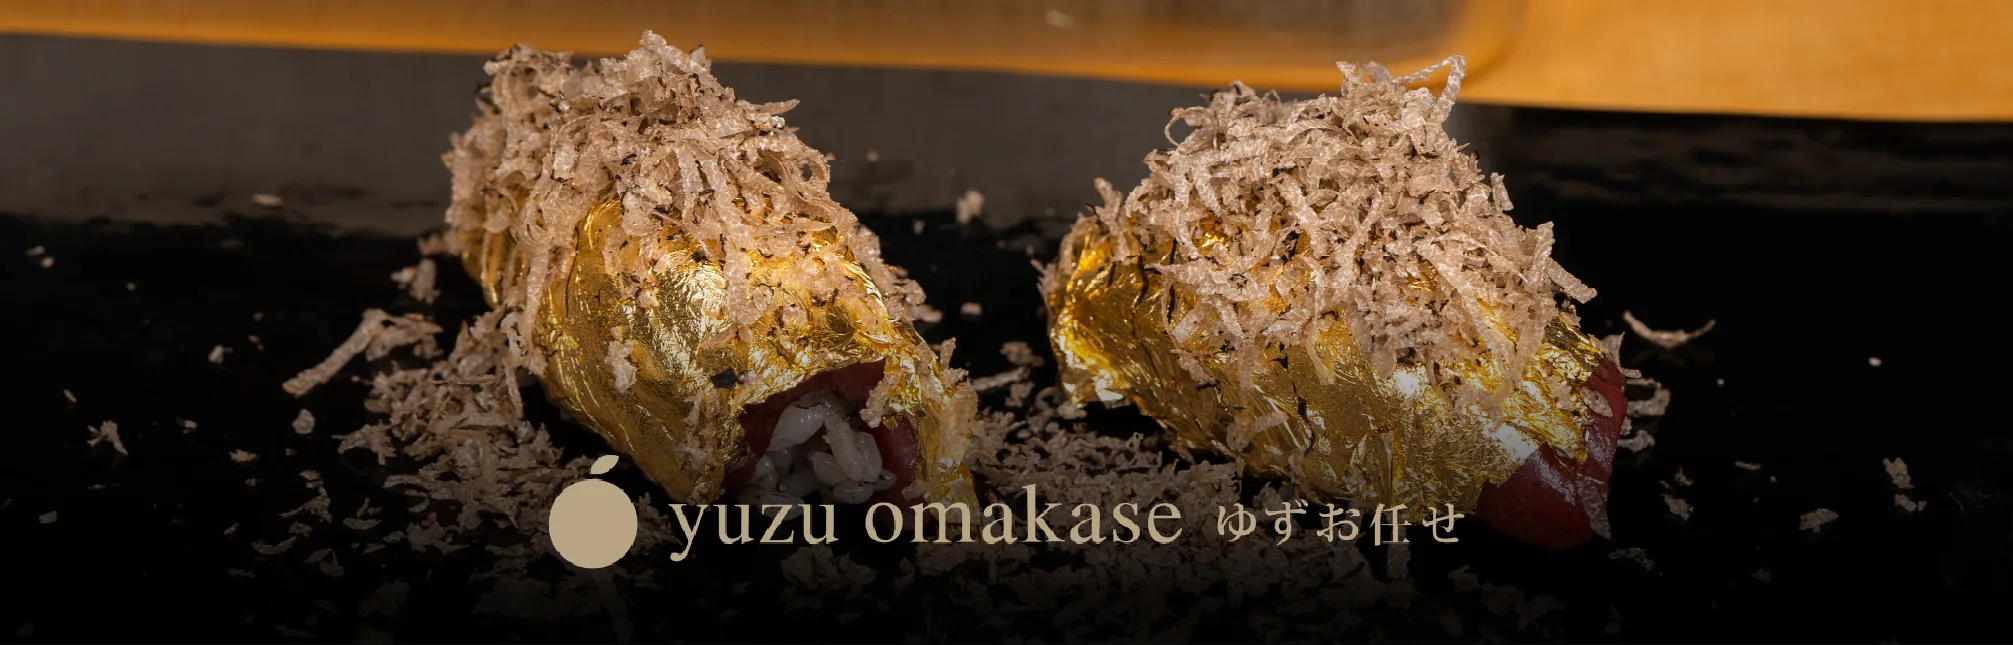 Yuzu Omakase Golden Delights Culinary Experience